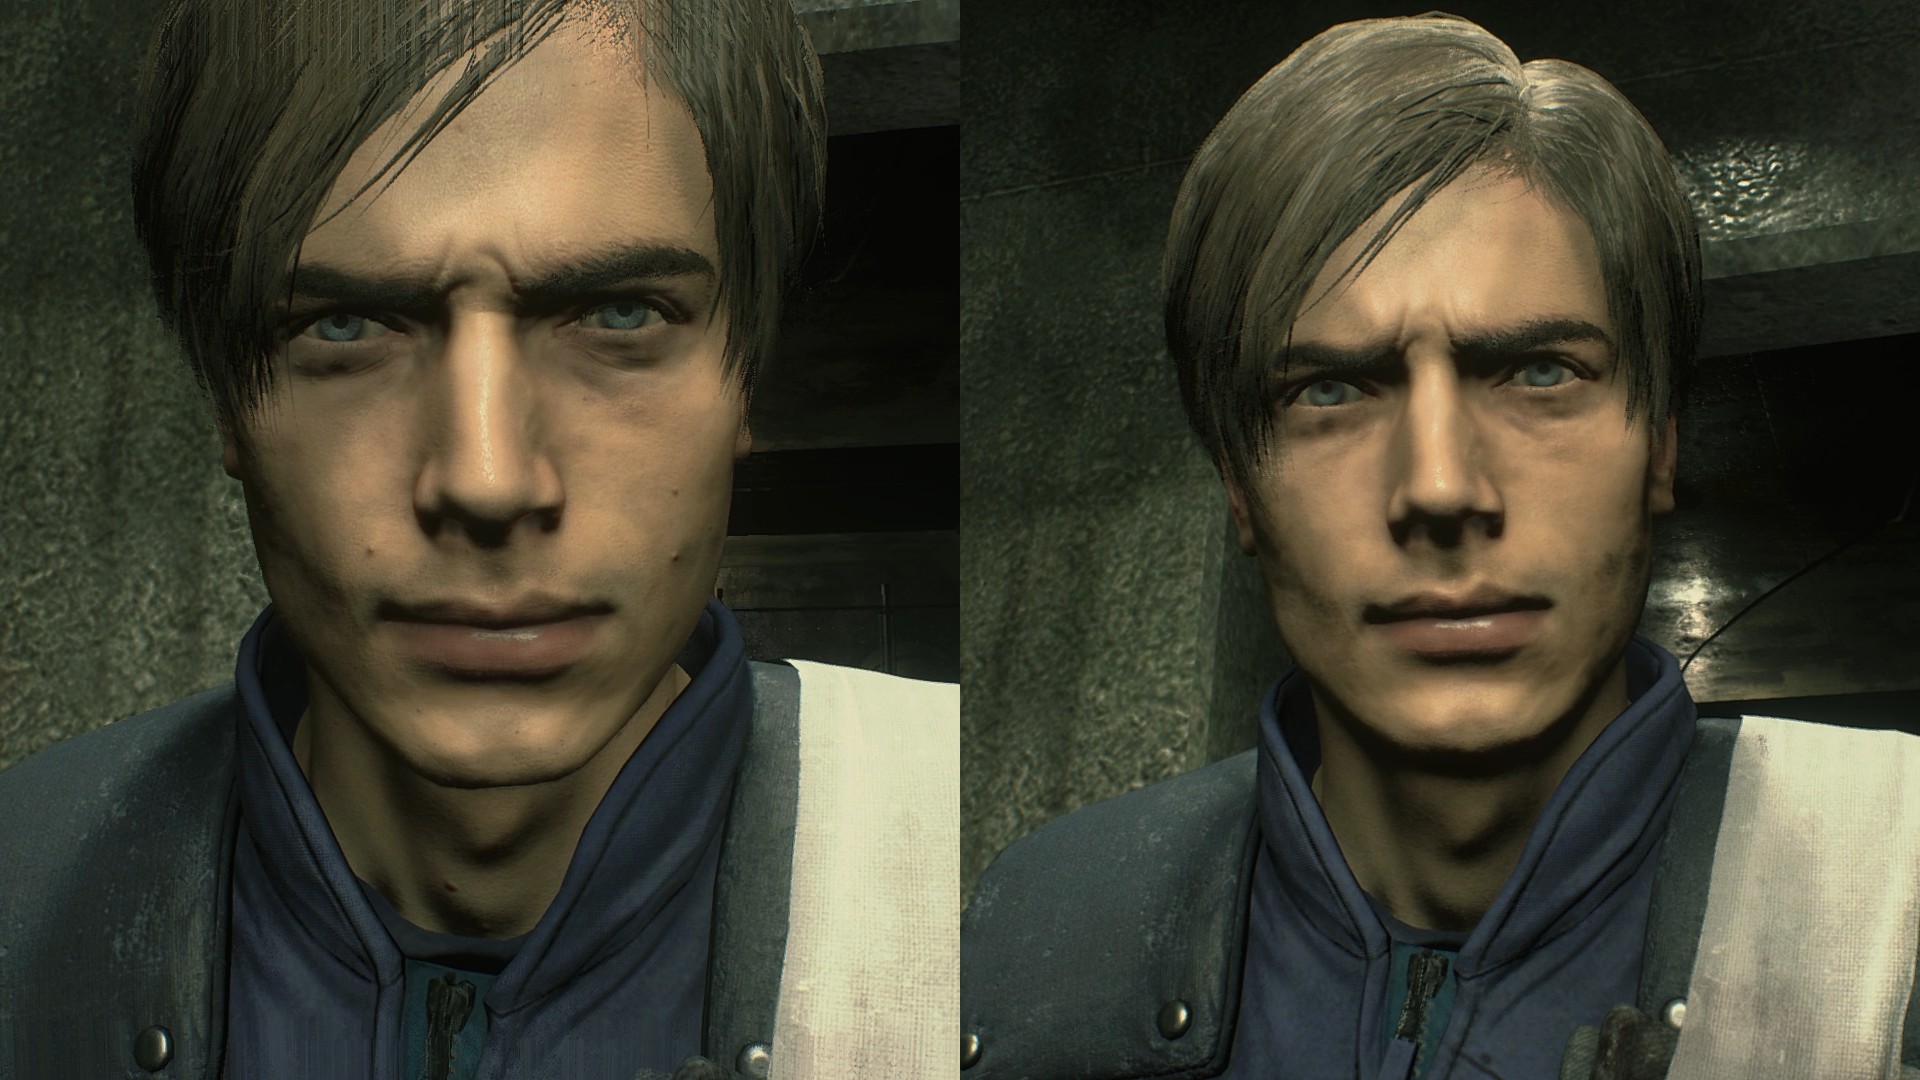 Hmm they should have picked me as the face model in the RE2 AND